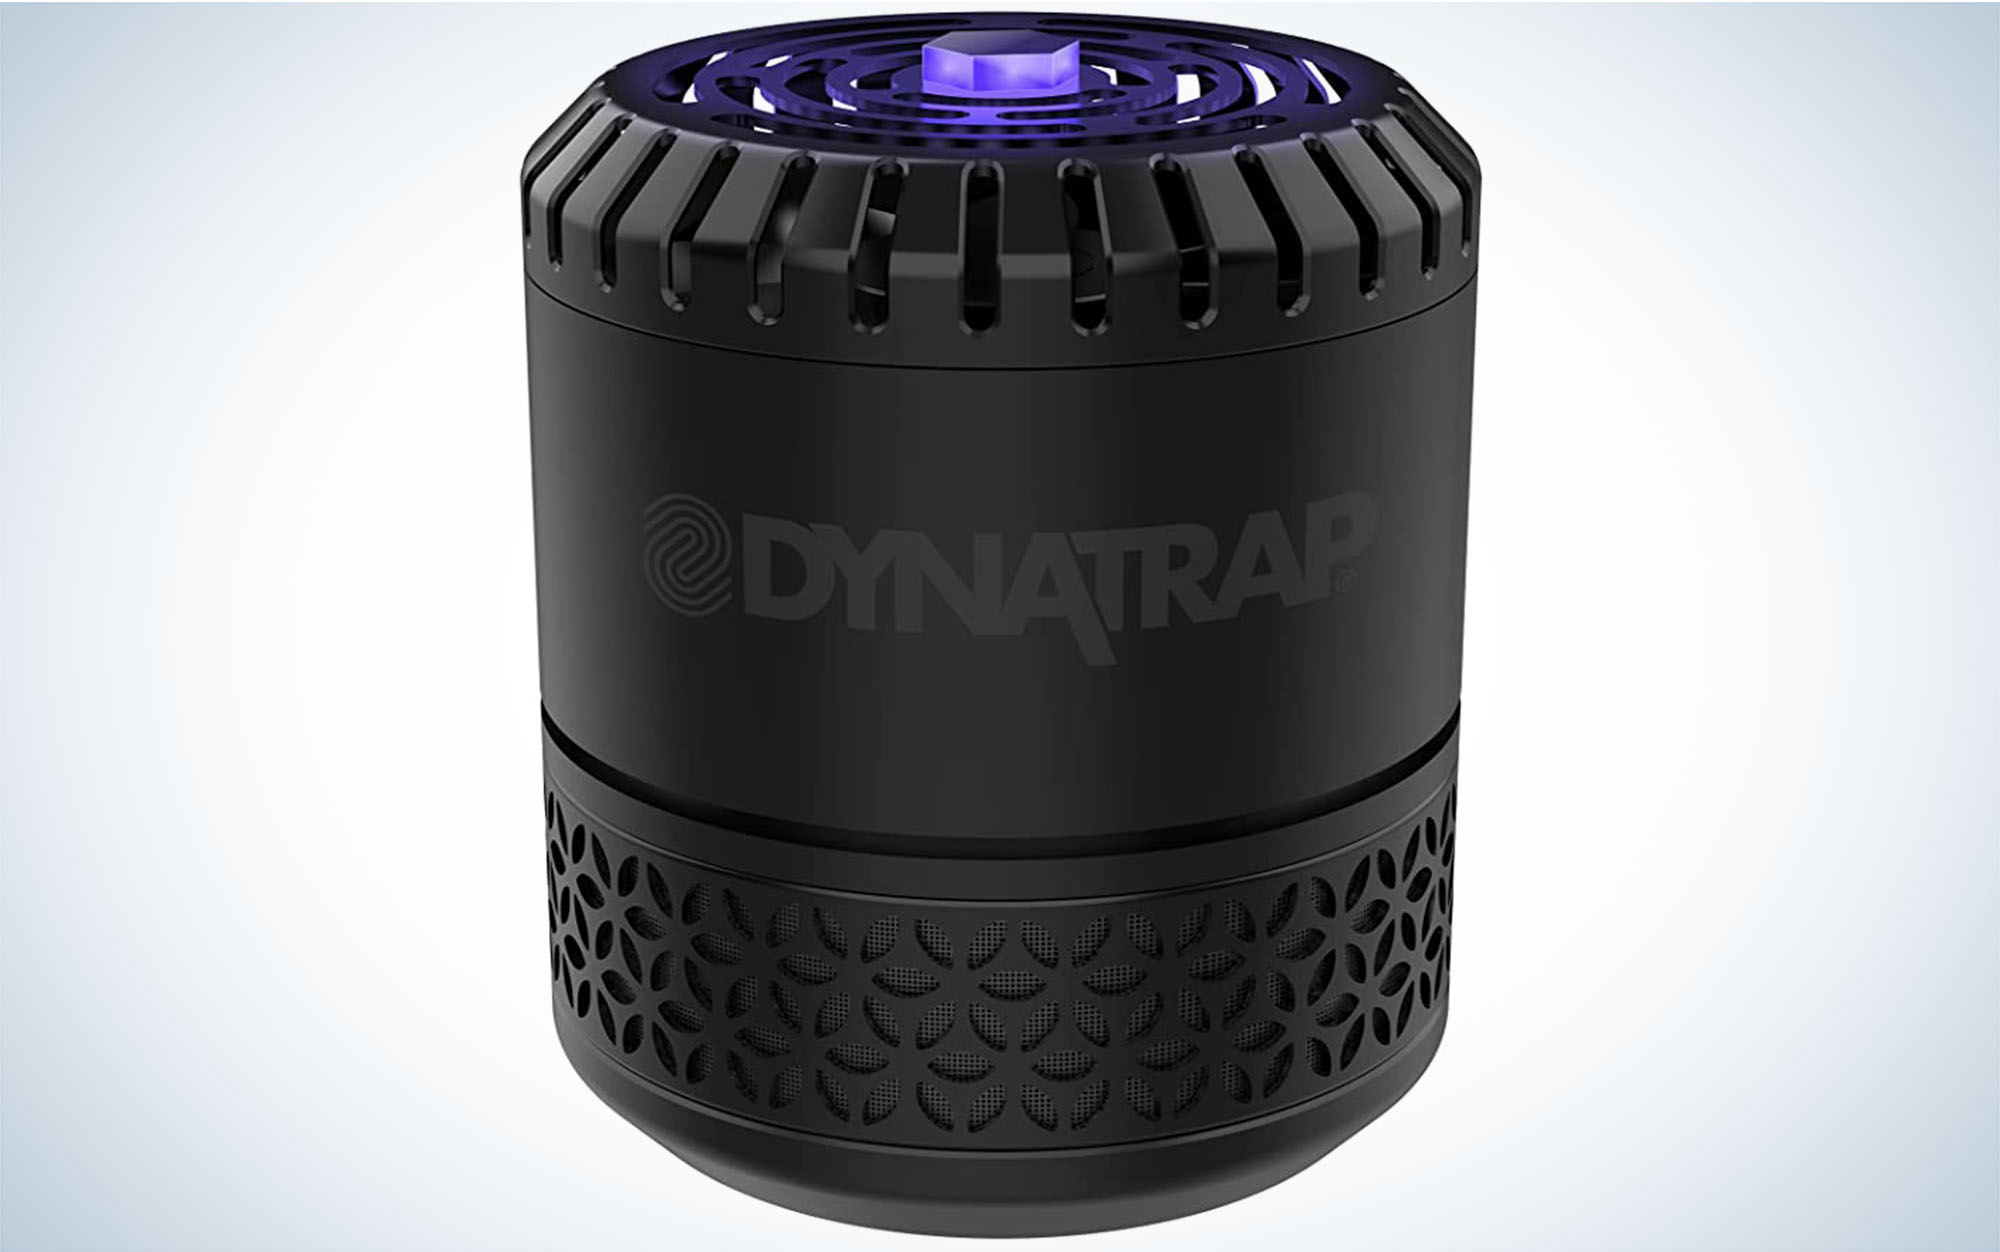 We tested the DynaTrap Indoor Insect Trap.